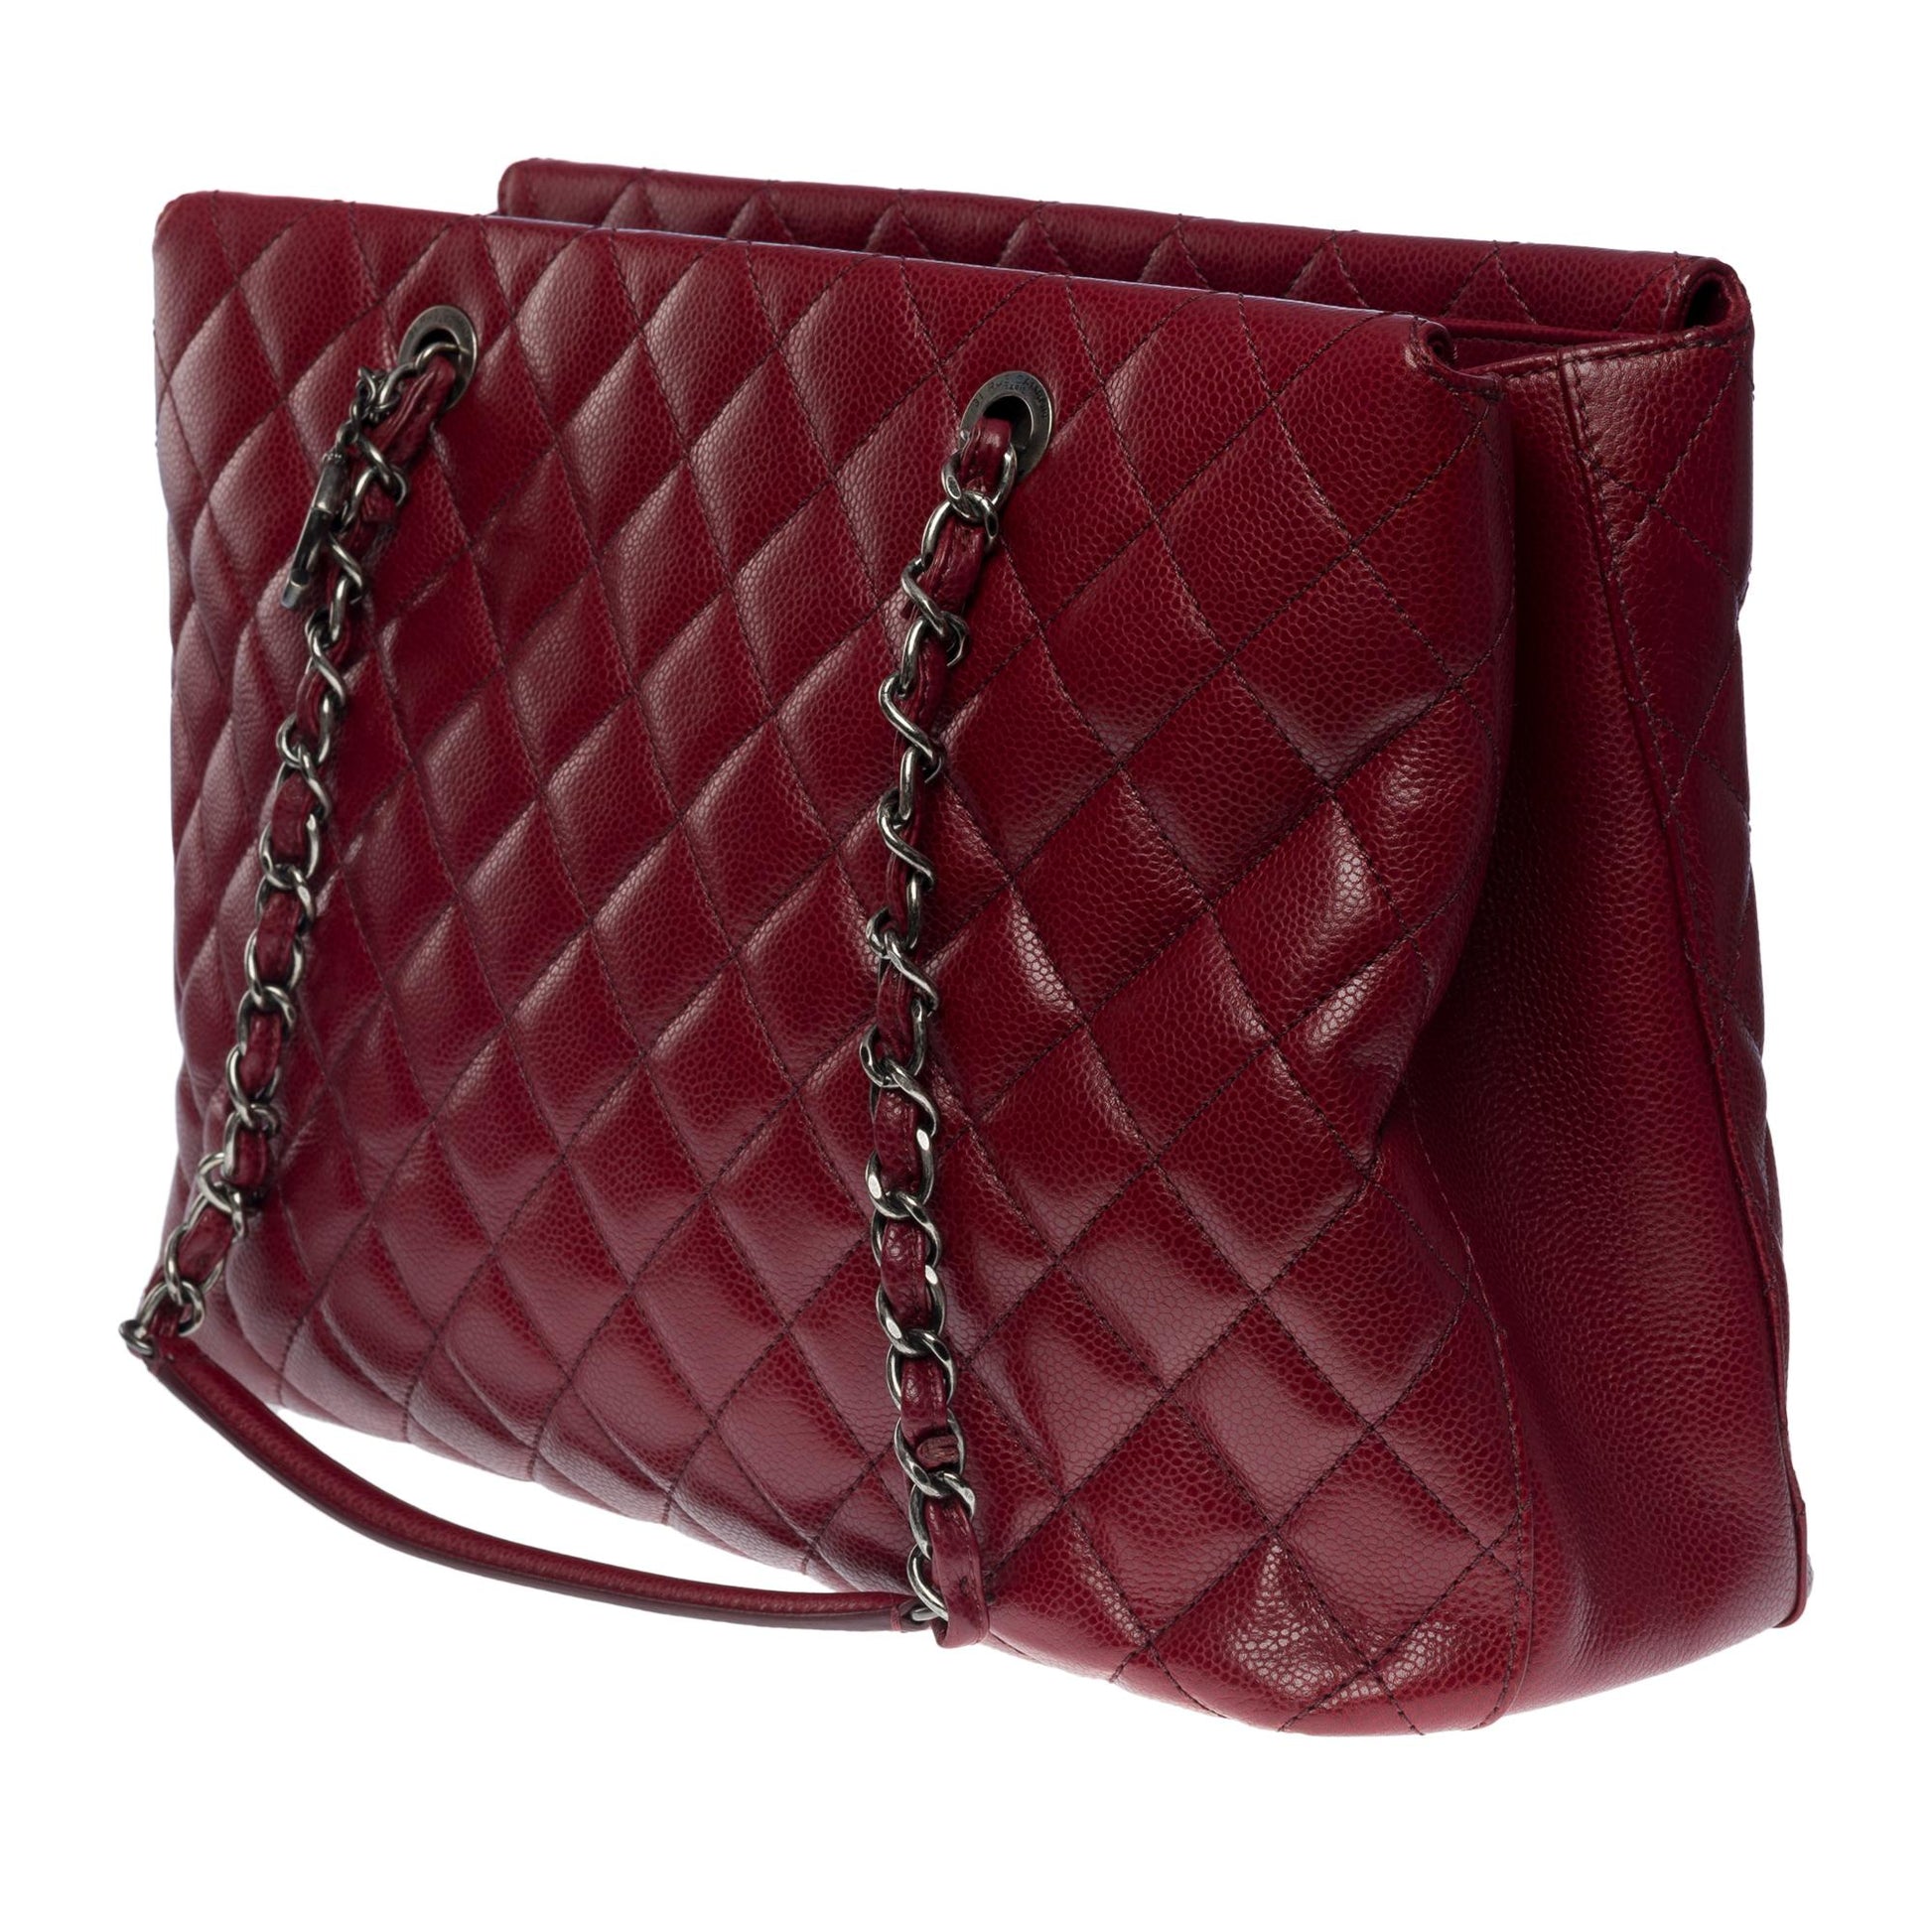 CHANEL Amazing Shopping Tote bag in Burgundy Caviar quilted leather, S